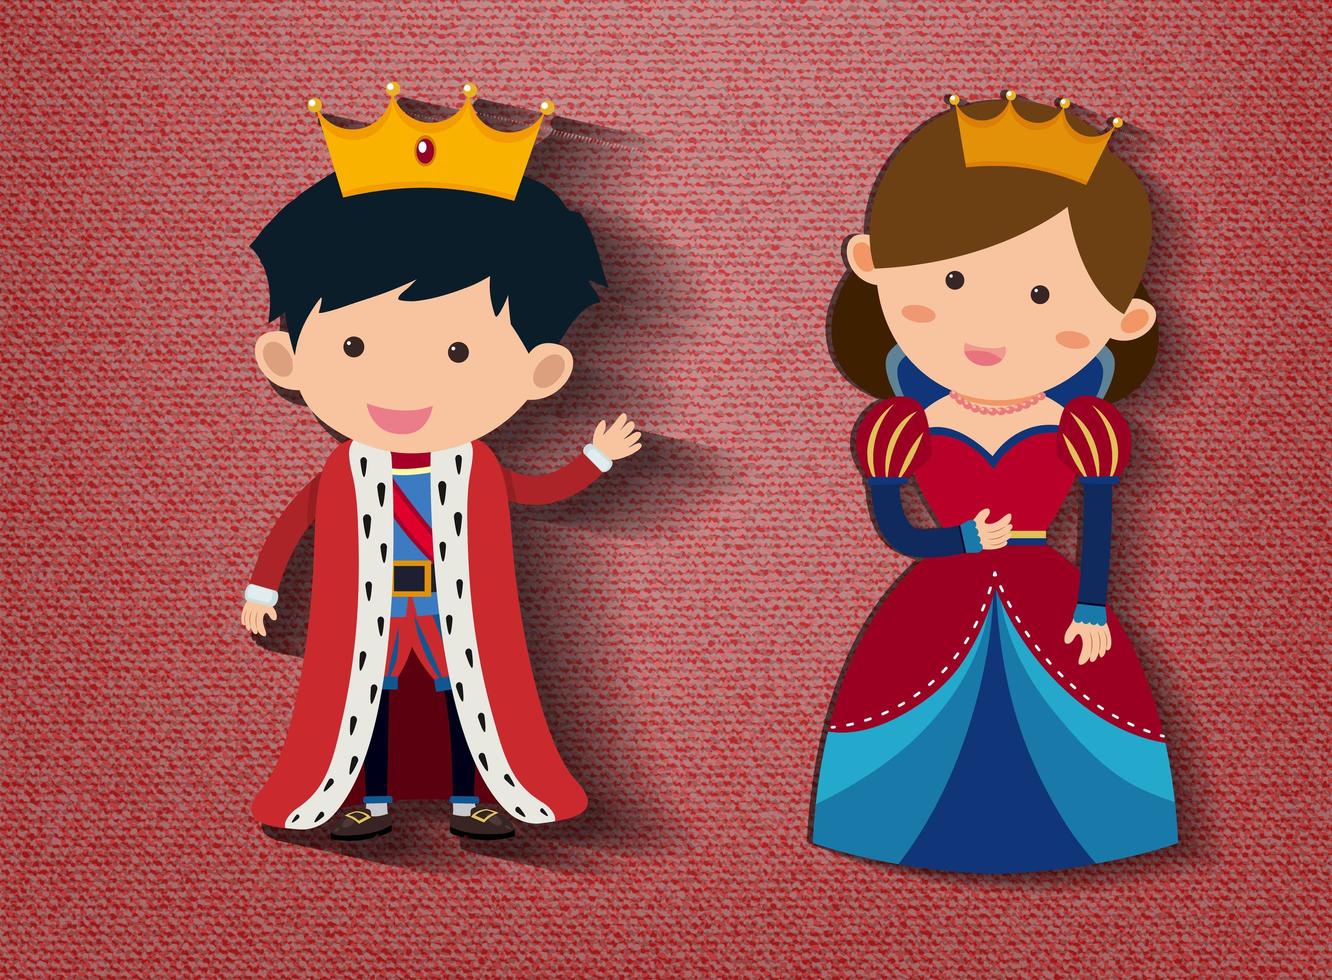 Little king and queen cartoon character on red background vector